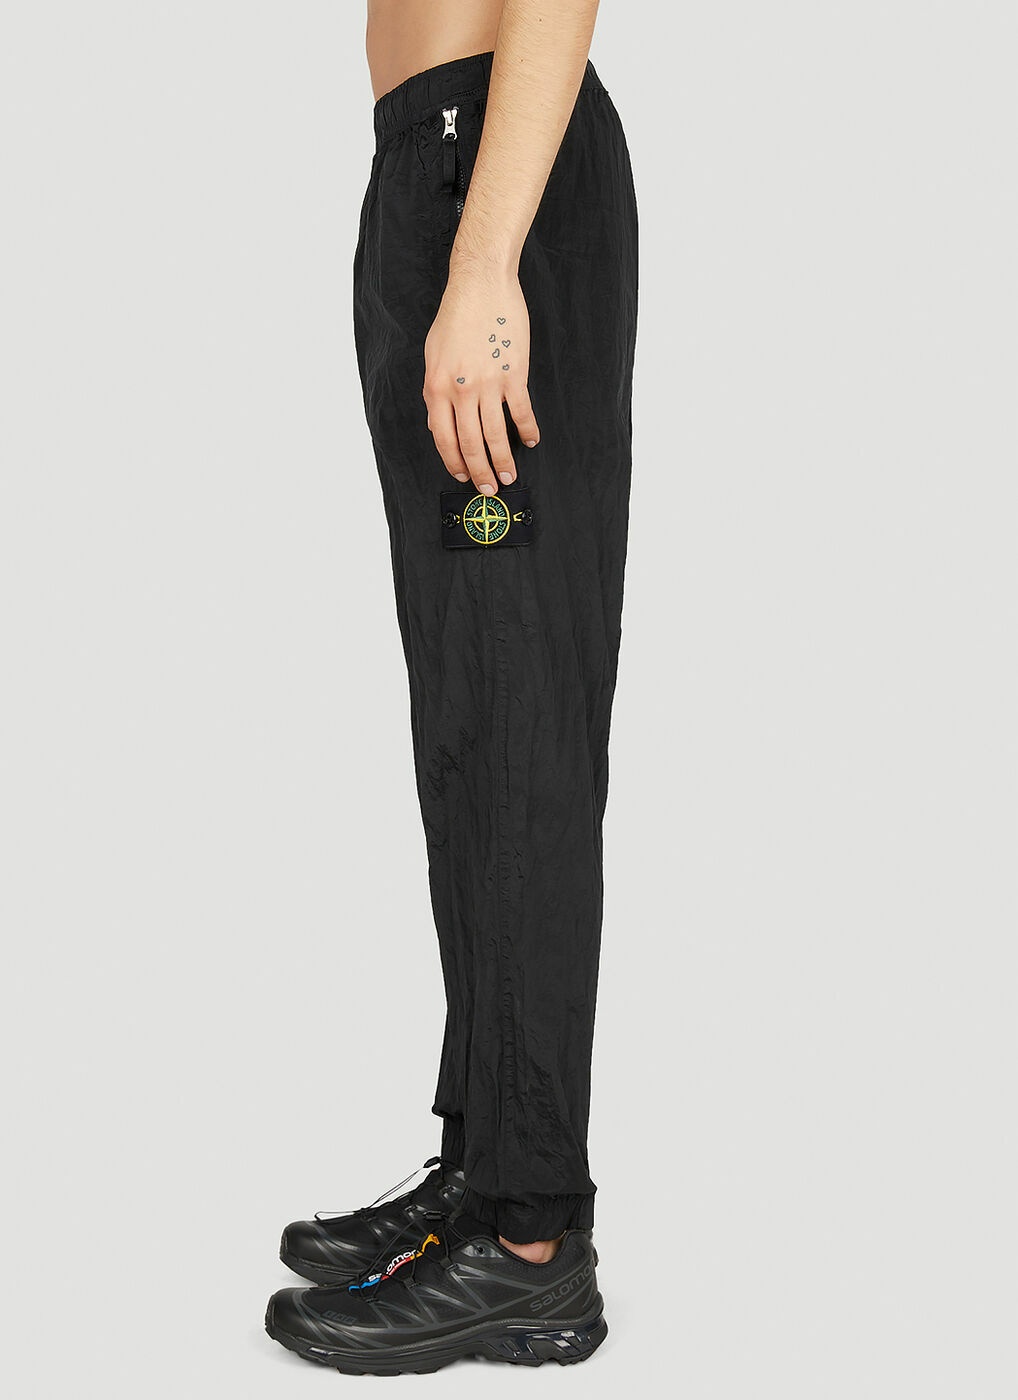 Stone Island - Compass Patch Track Pants in Black Stone Island